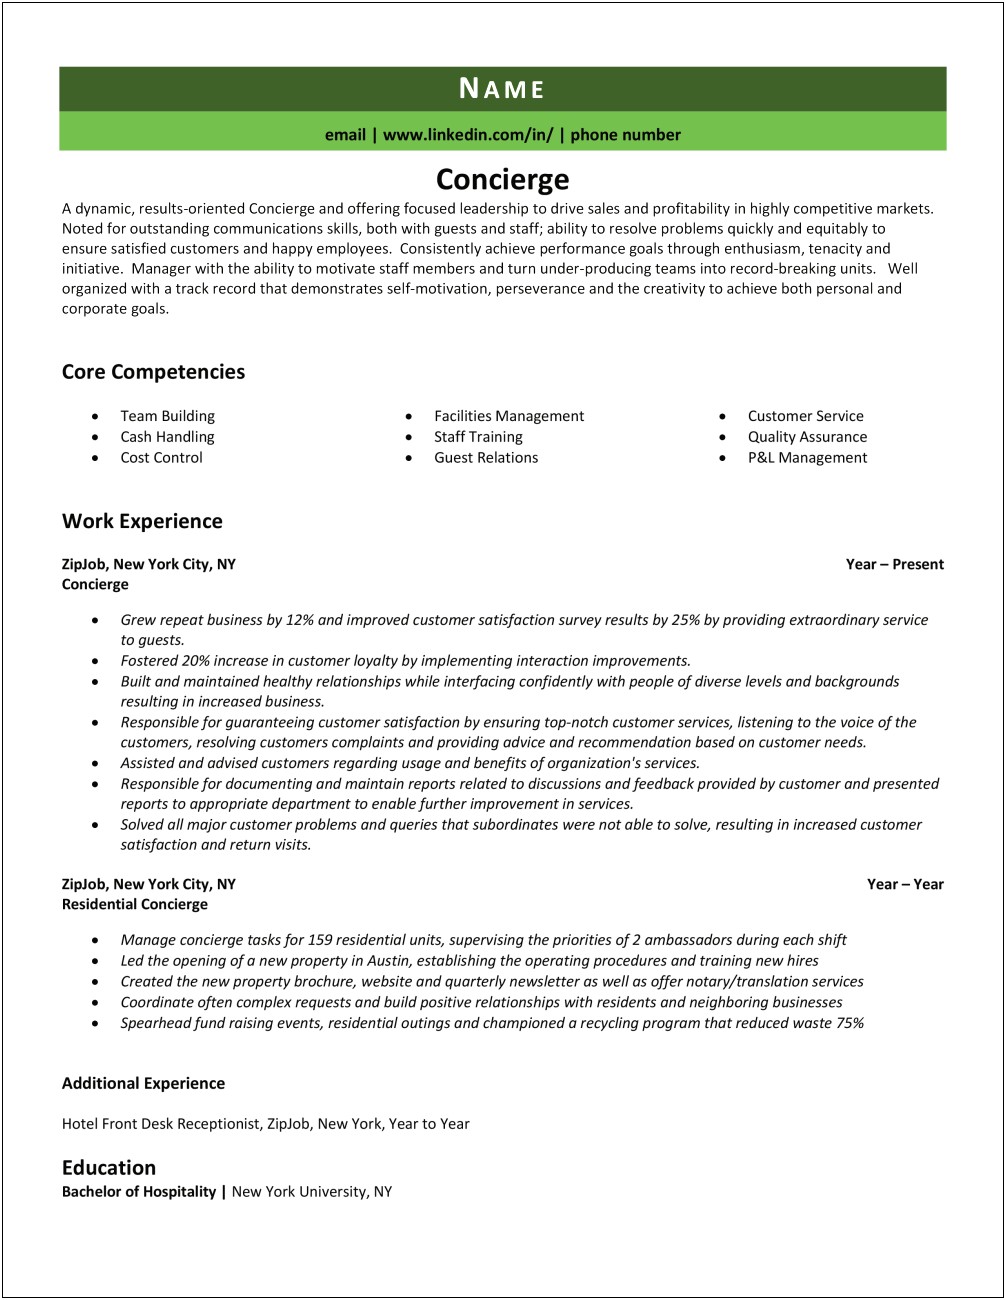 Professional Summary For Resume For Concierge